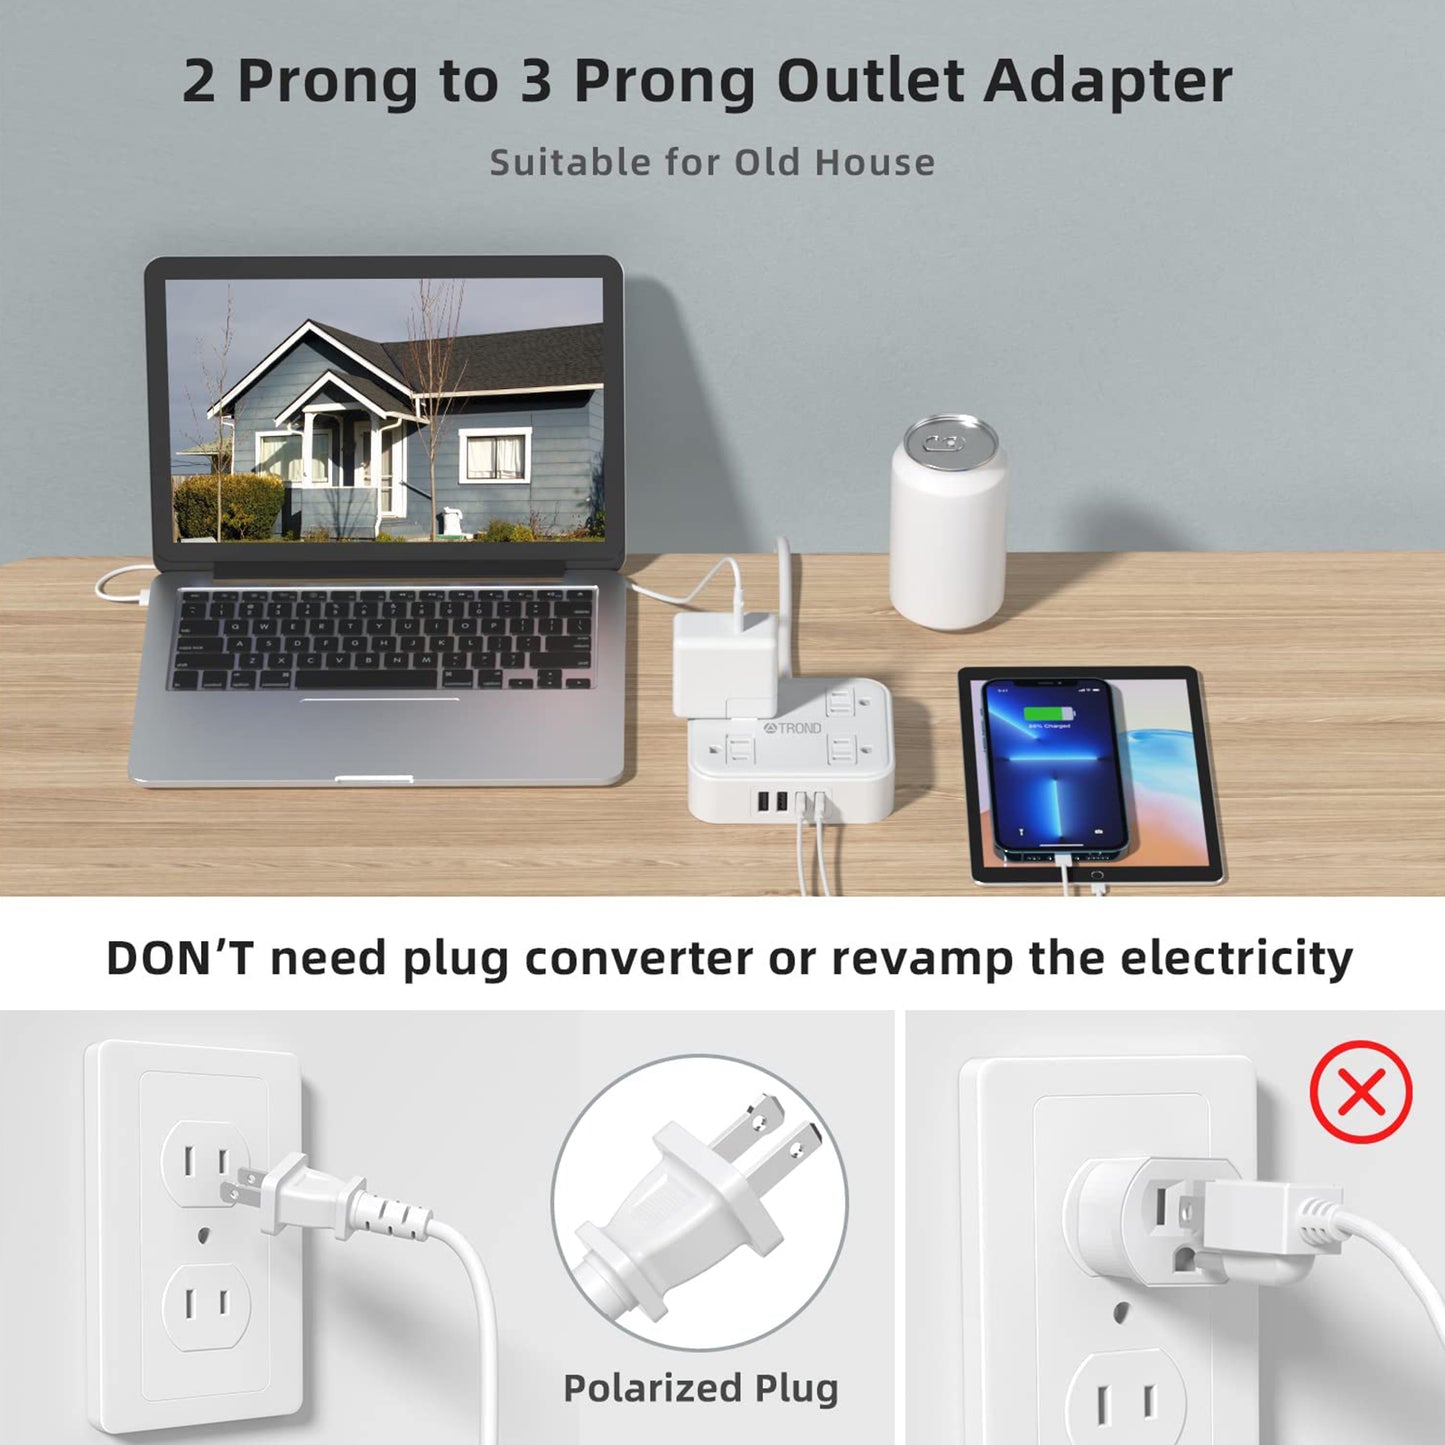 Two Prong Power Strip USB - TROND 2 Prong to 3 Prong Outlet Adapter